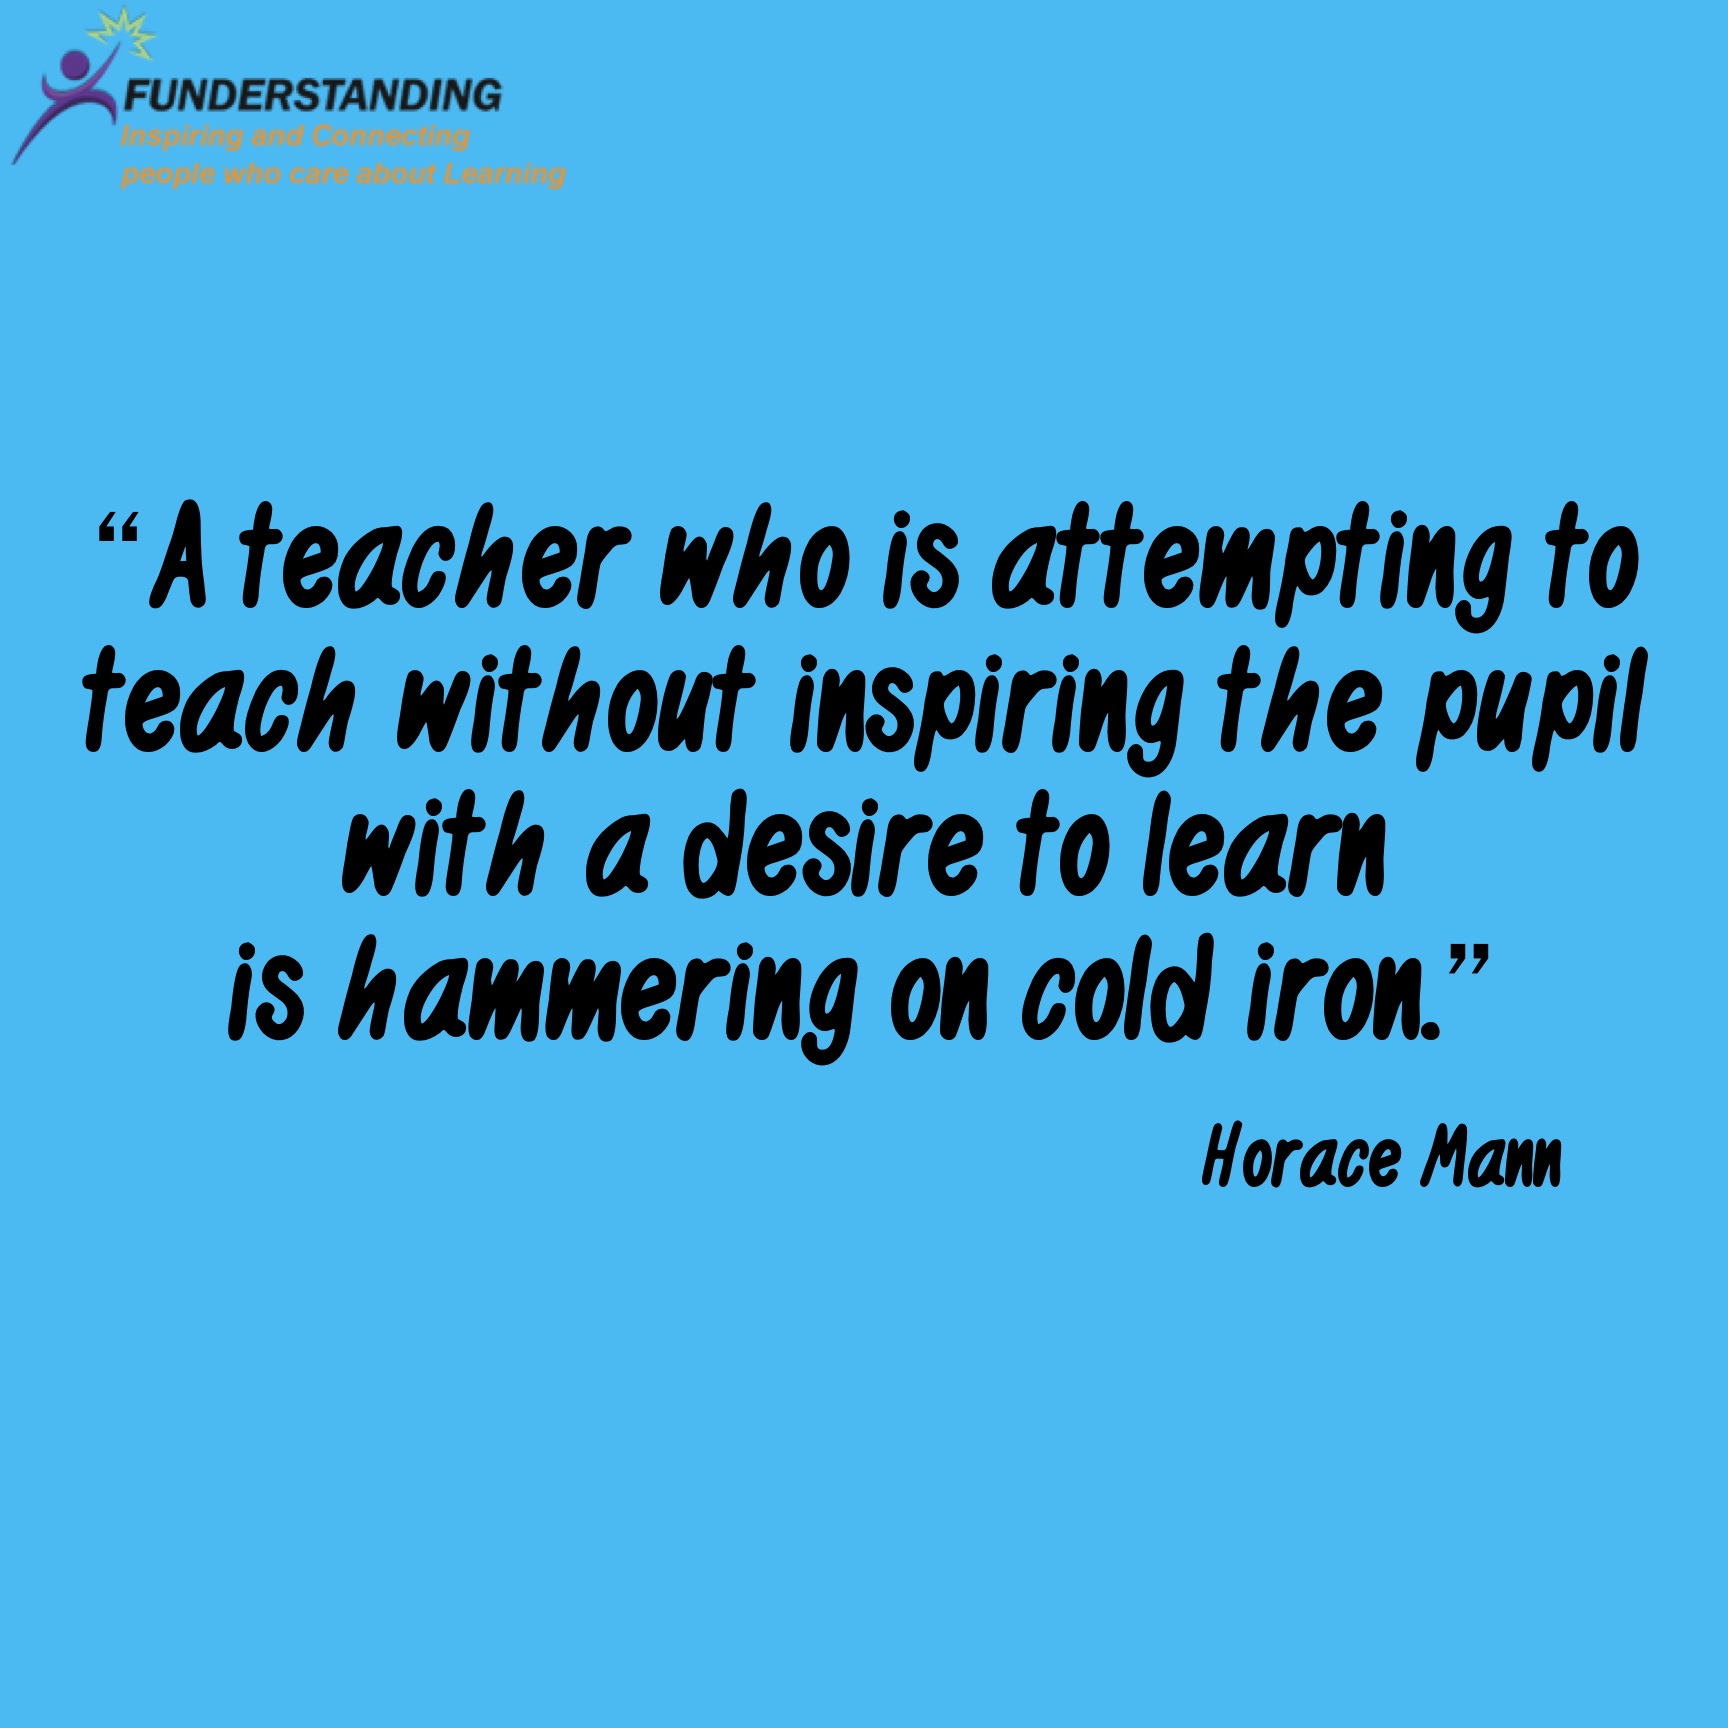 A teacher who is attempting to teach without inspiring the pupil with a desire to learn is hammering on cold iron. Horace Mann